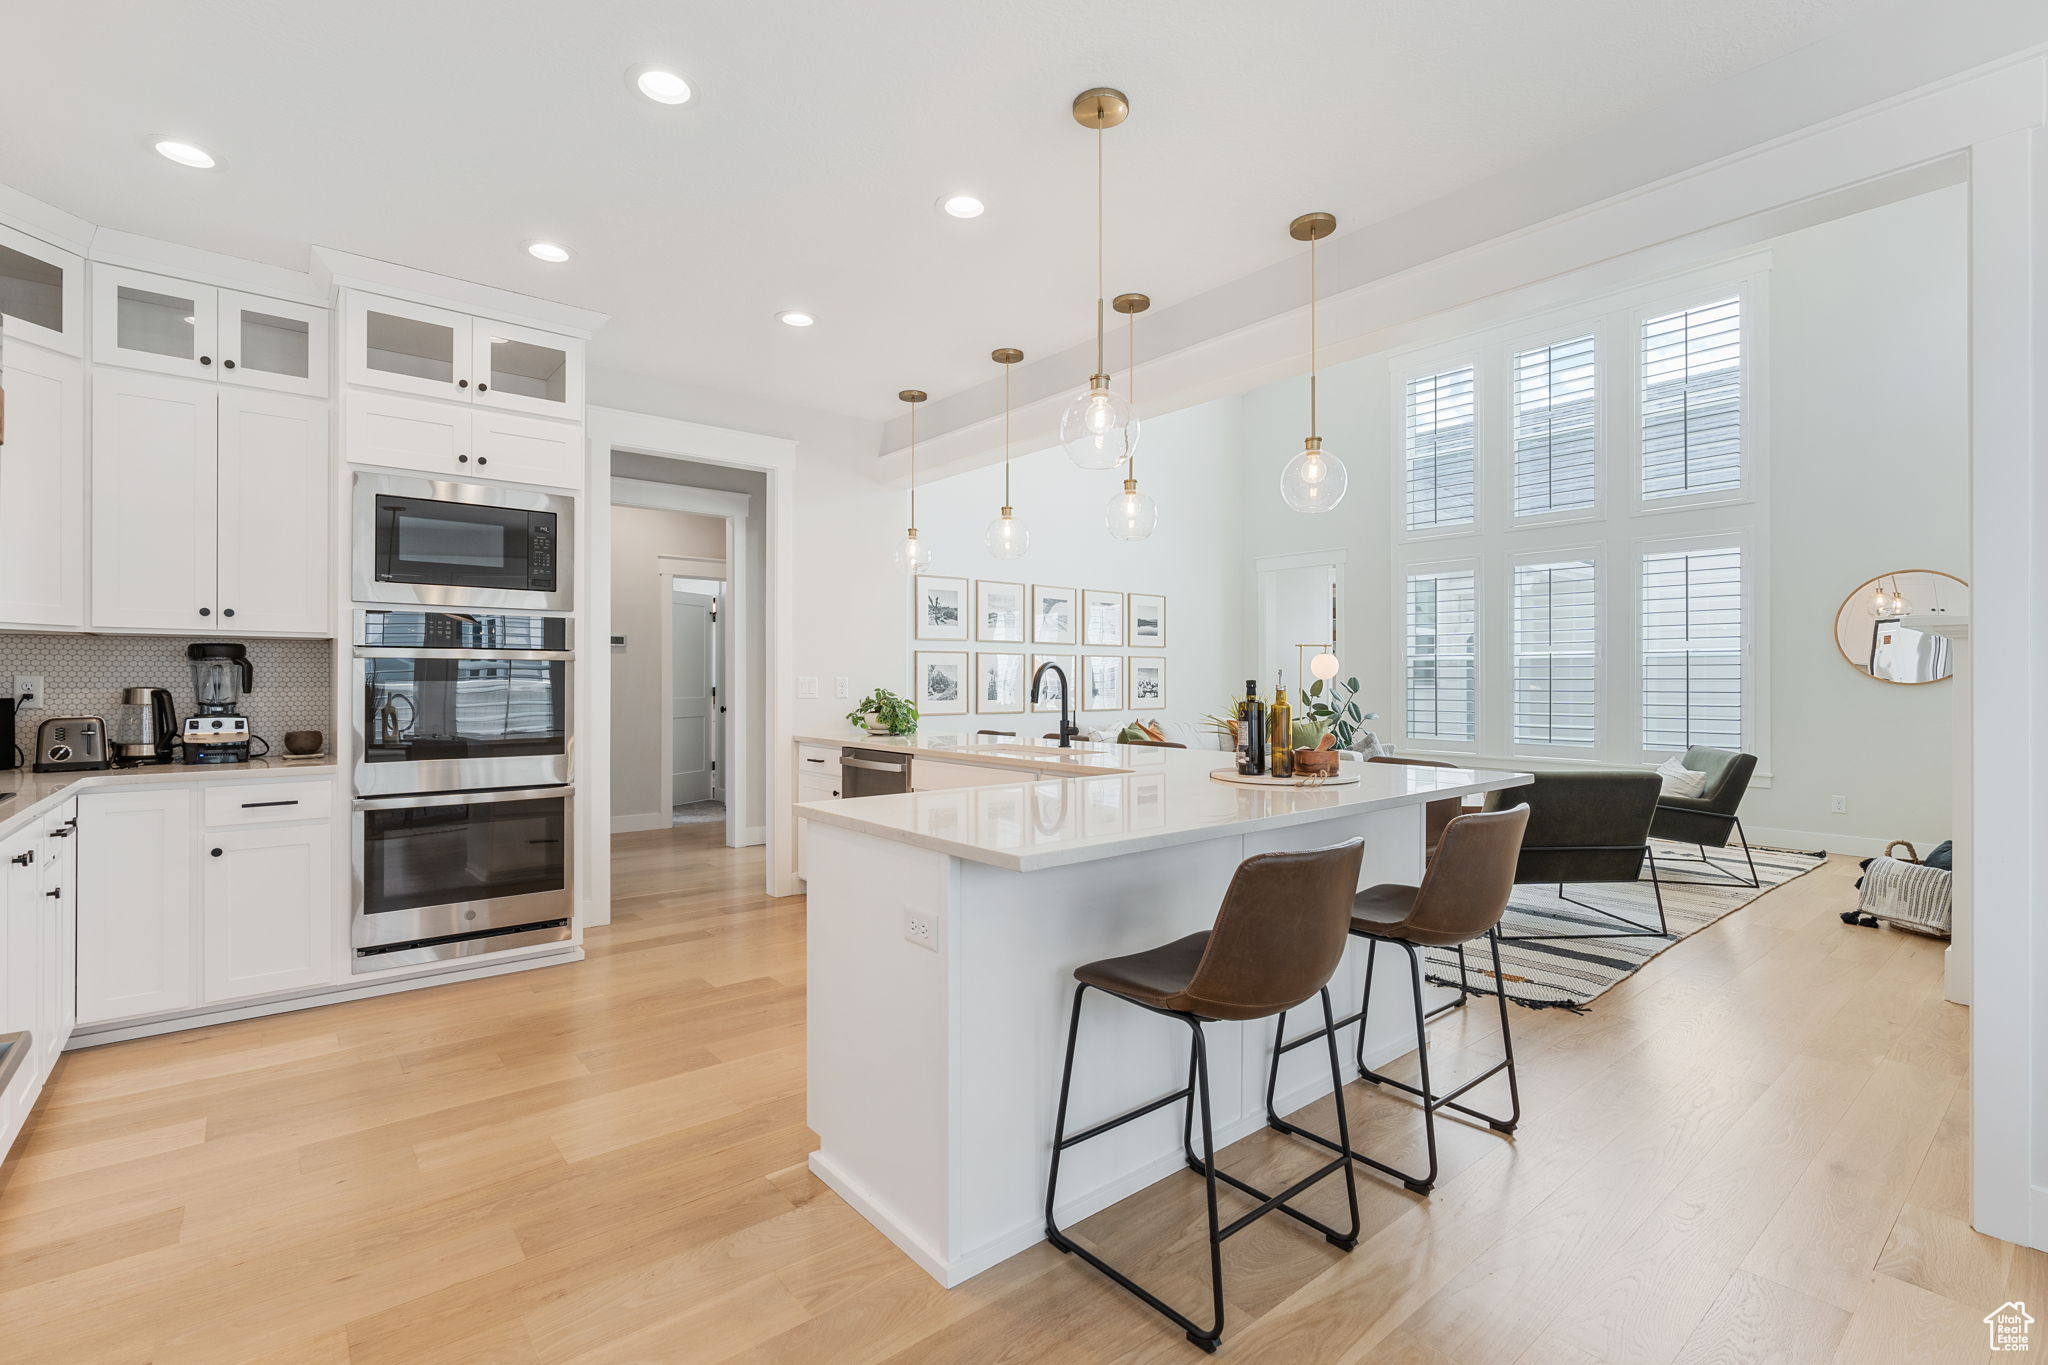 Gourmet kitchen with stainless steel appliances, white cabinetry, white oak hardwood flooring, and contemporary light fixtures.